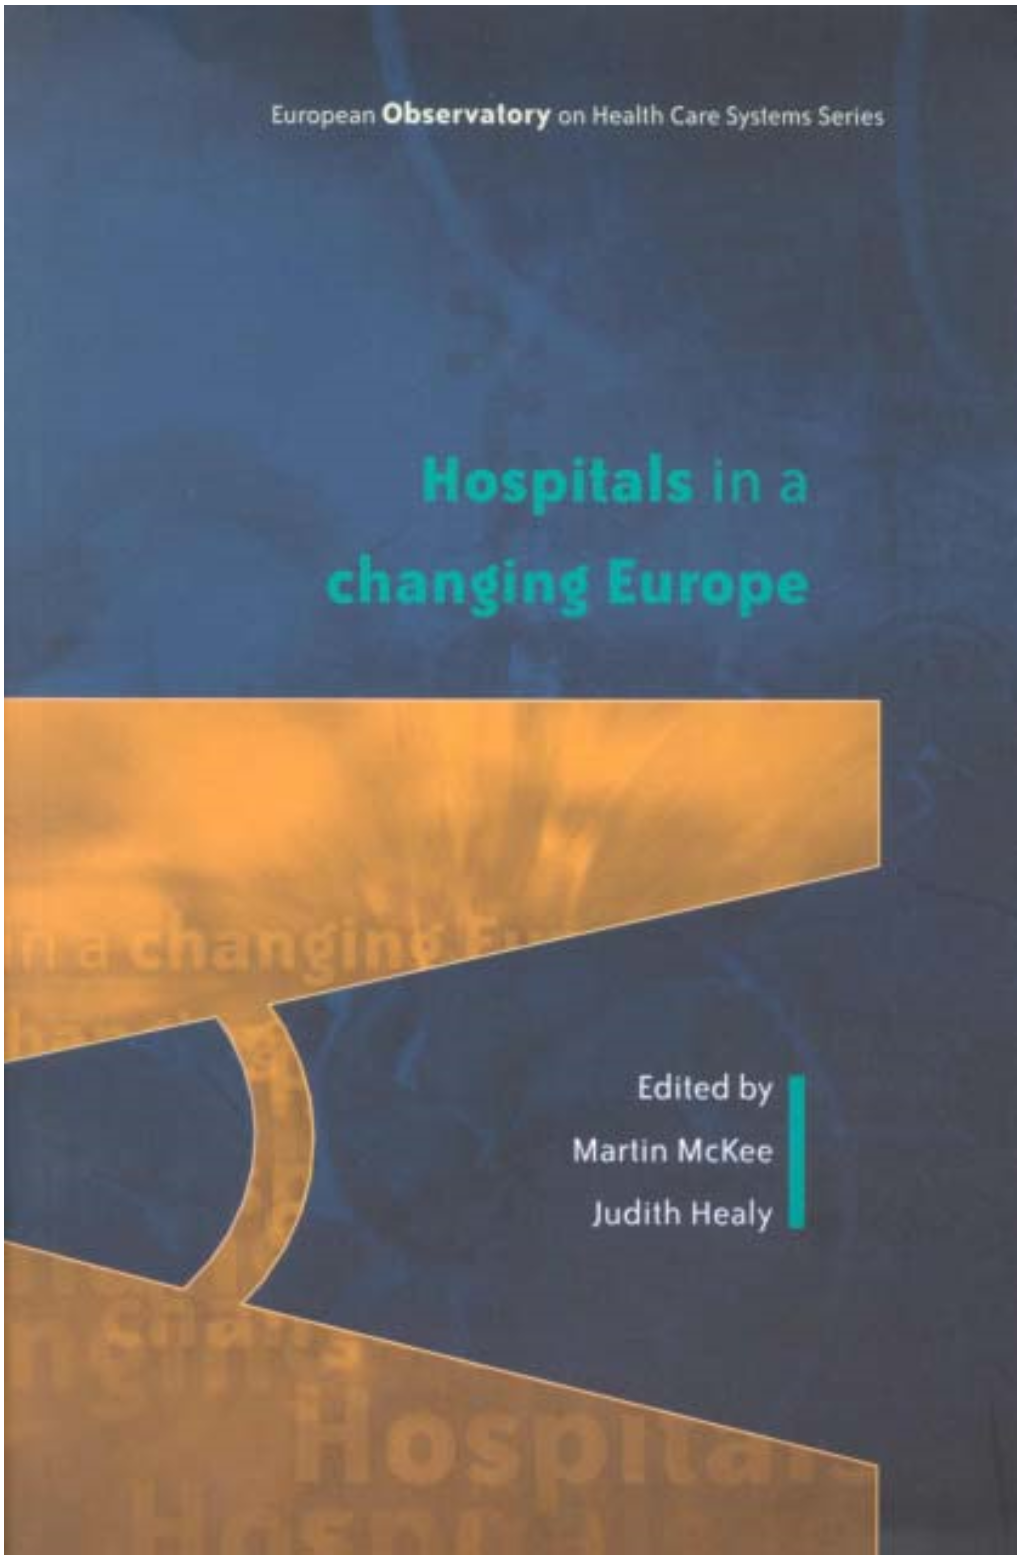 EN: Hospitals in a Changing Europe